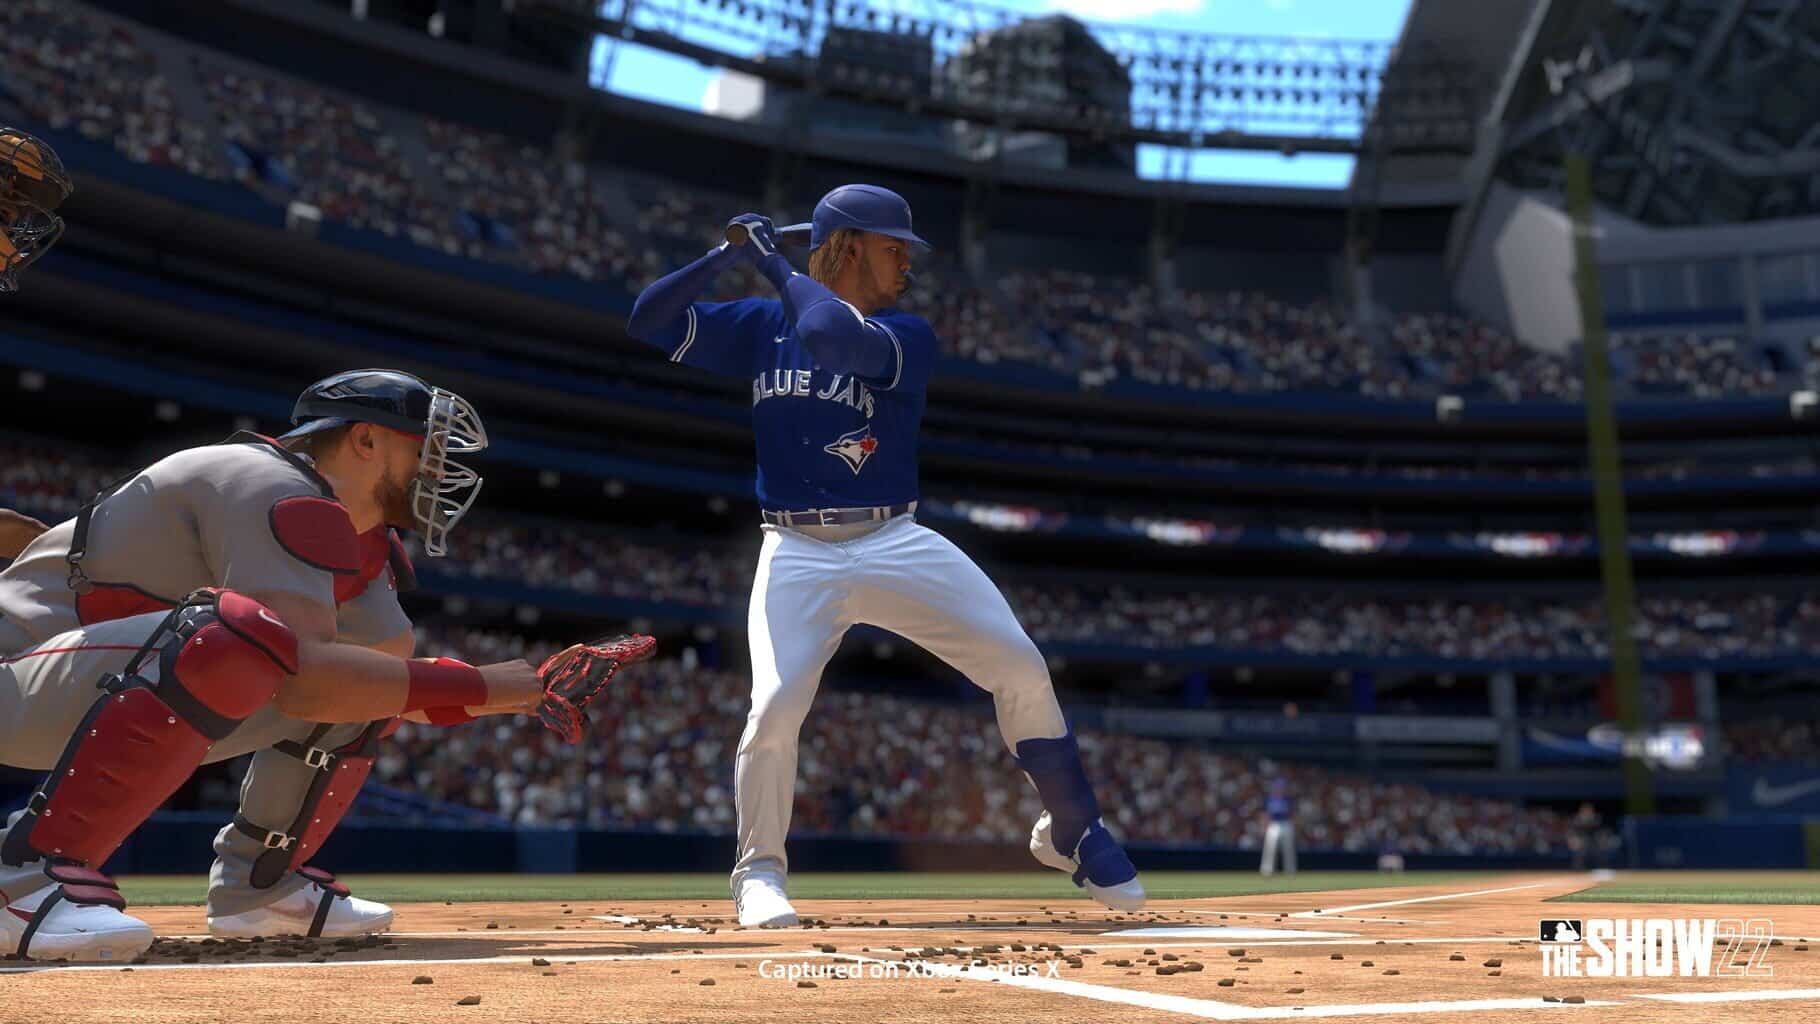 MLB The Show 22 update 1.16